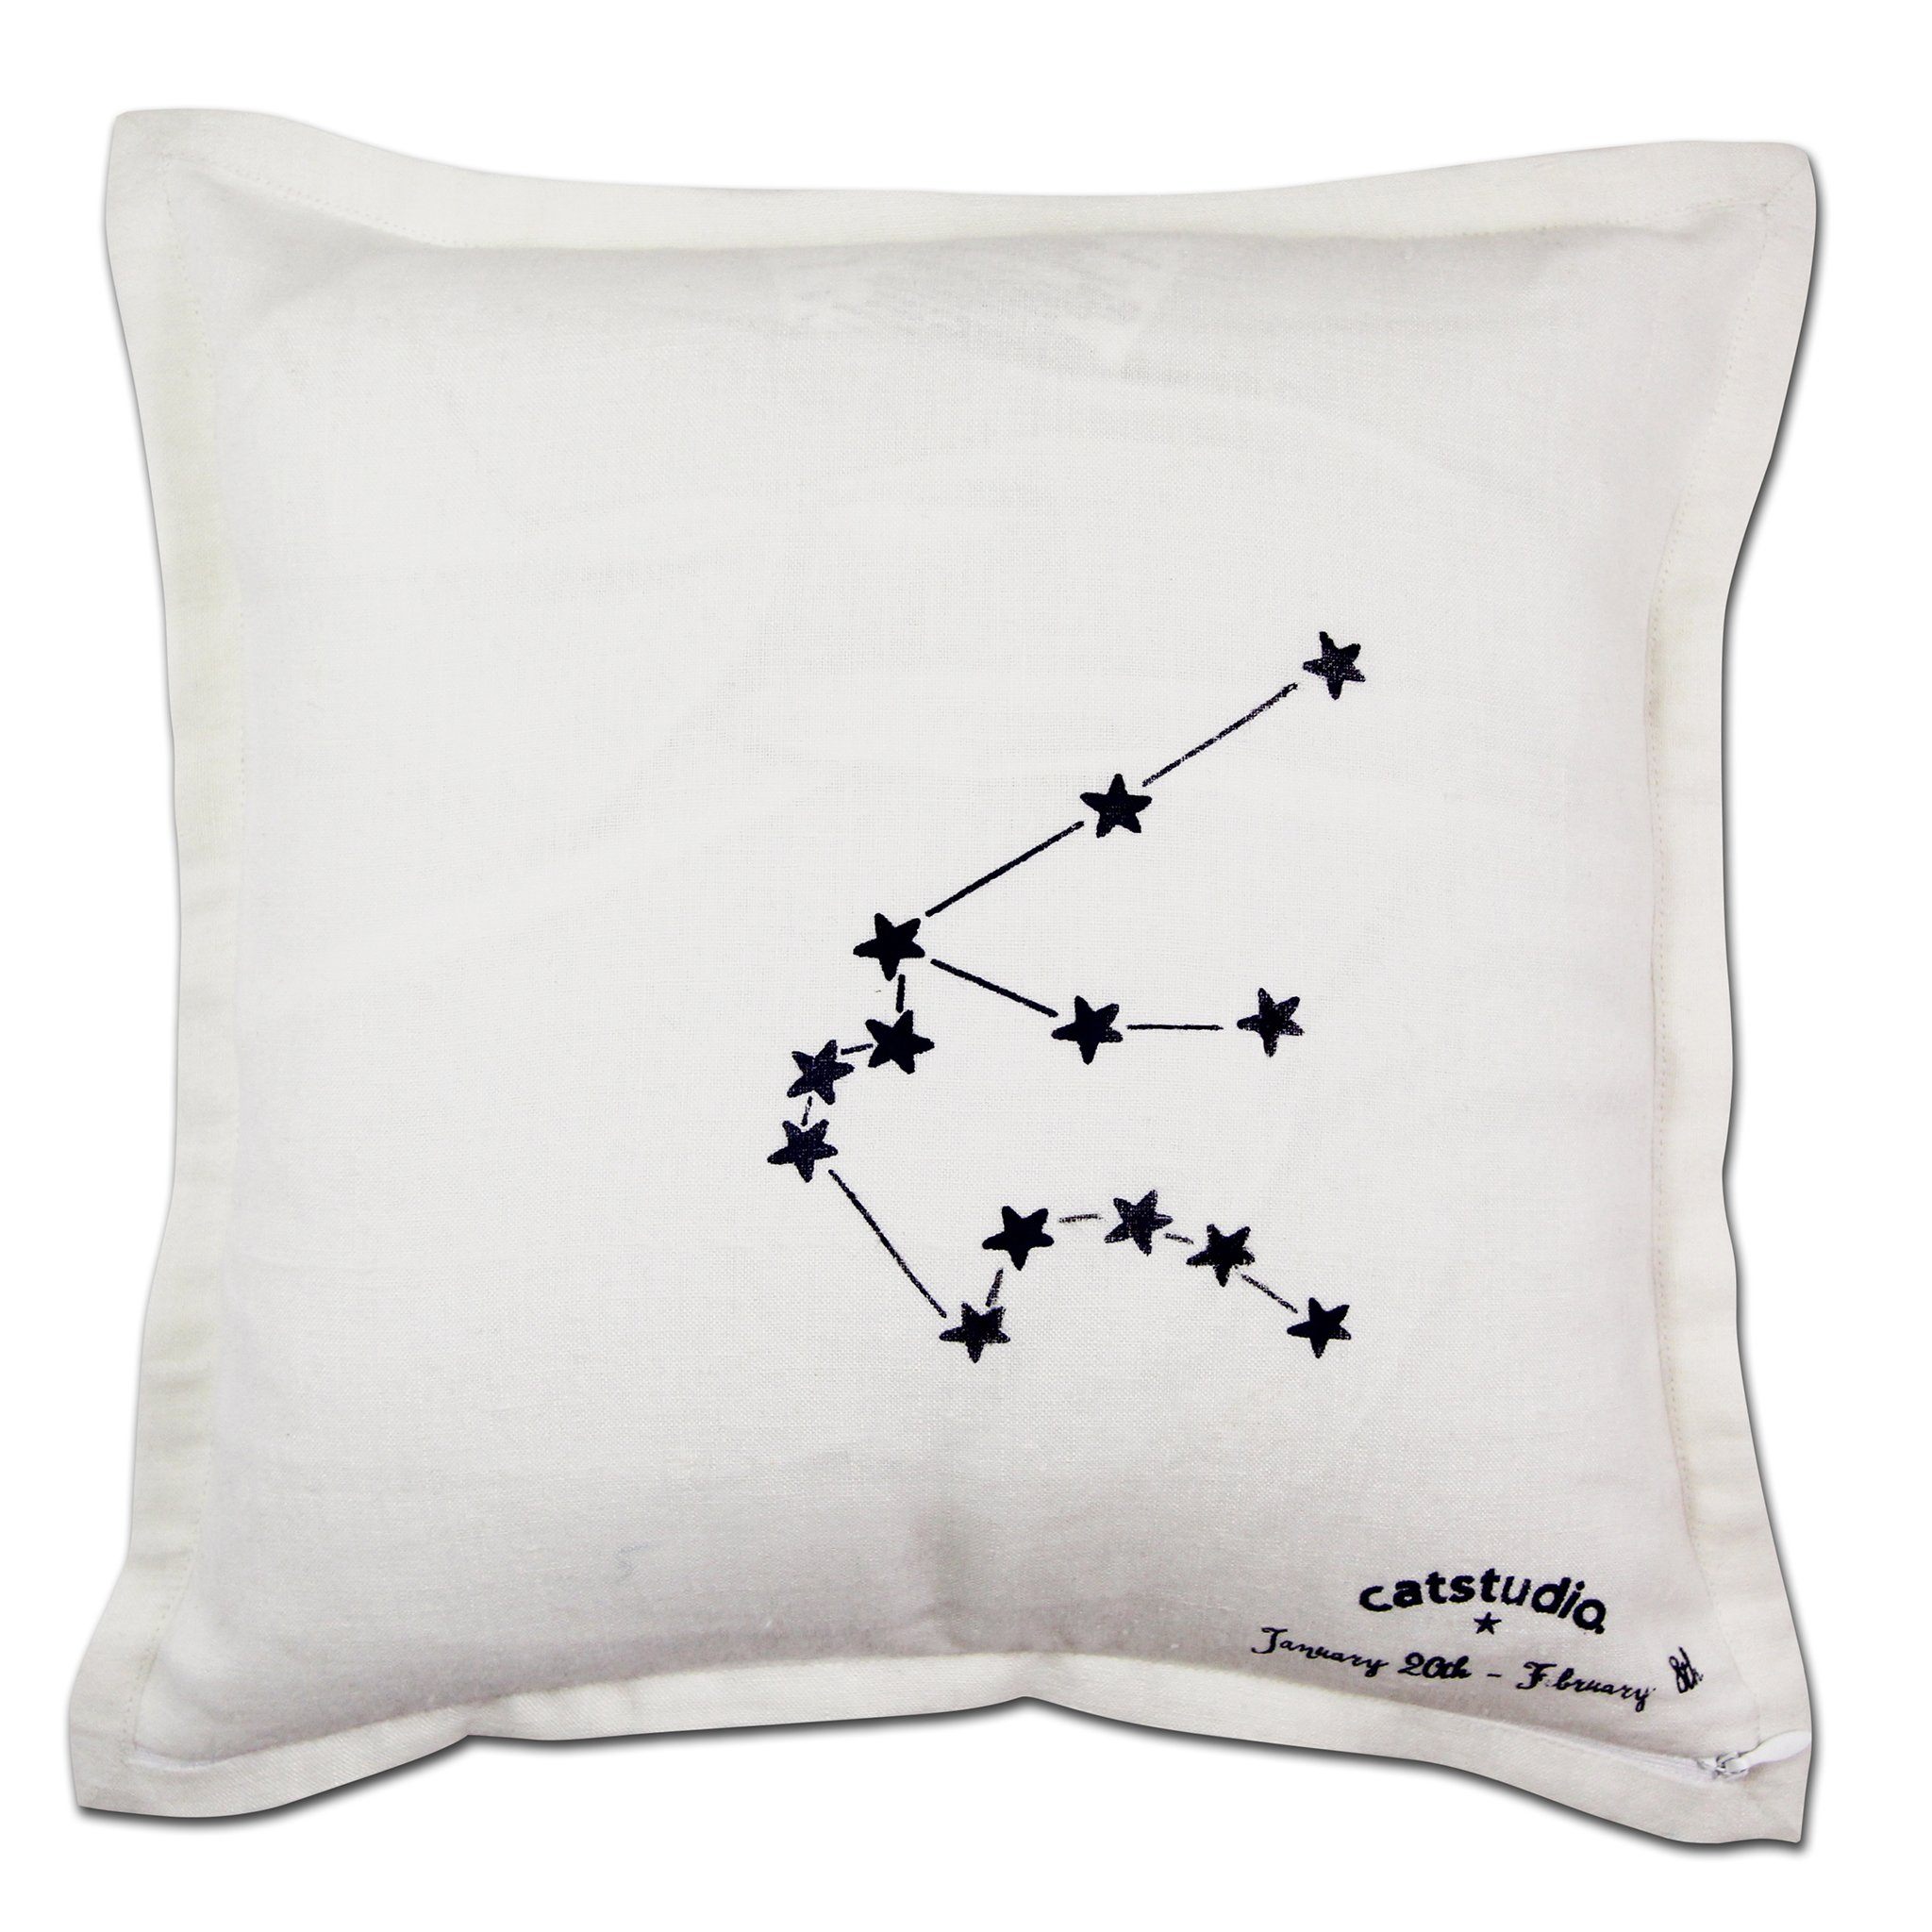 Aquarius Hand-Embroidered Pillow | Astrology Collection by catstudio ...